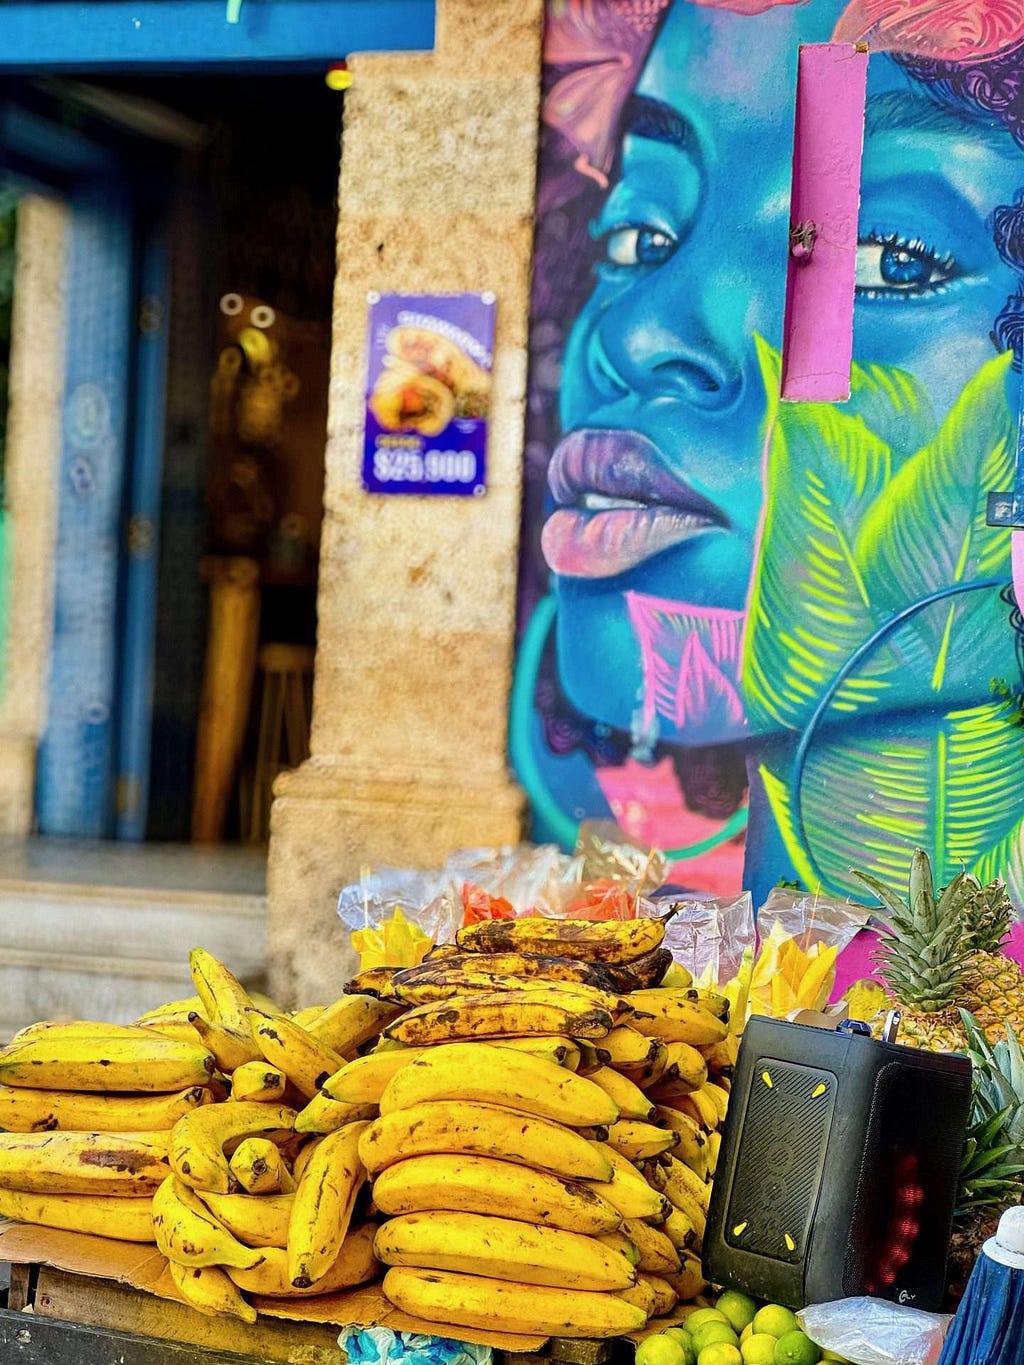 A pile of ripe bananas and other fruits are on display at an outdoor market stand in the neighborhood of Getsamani in Cartegena, Colombia. In the background, there is a colorful mural of a woman's face.